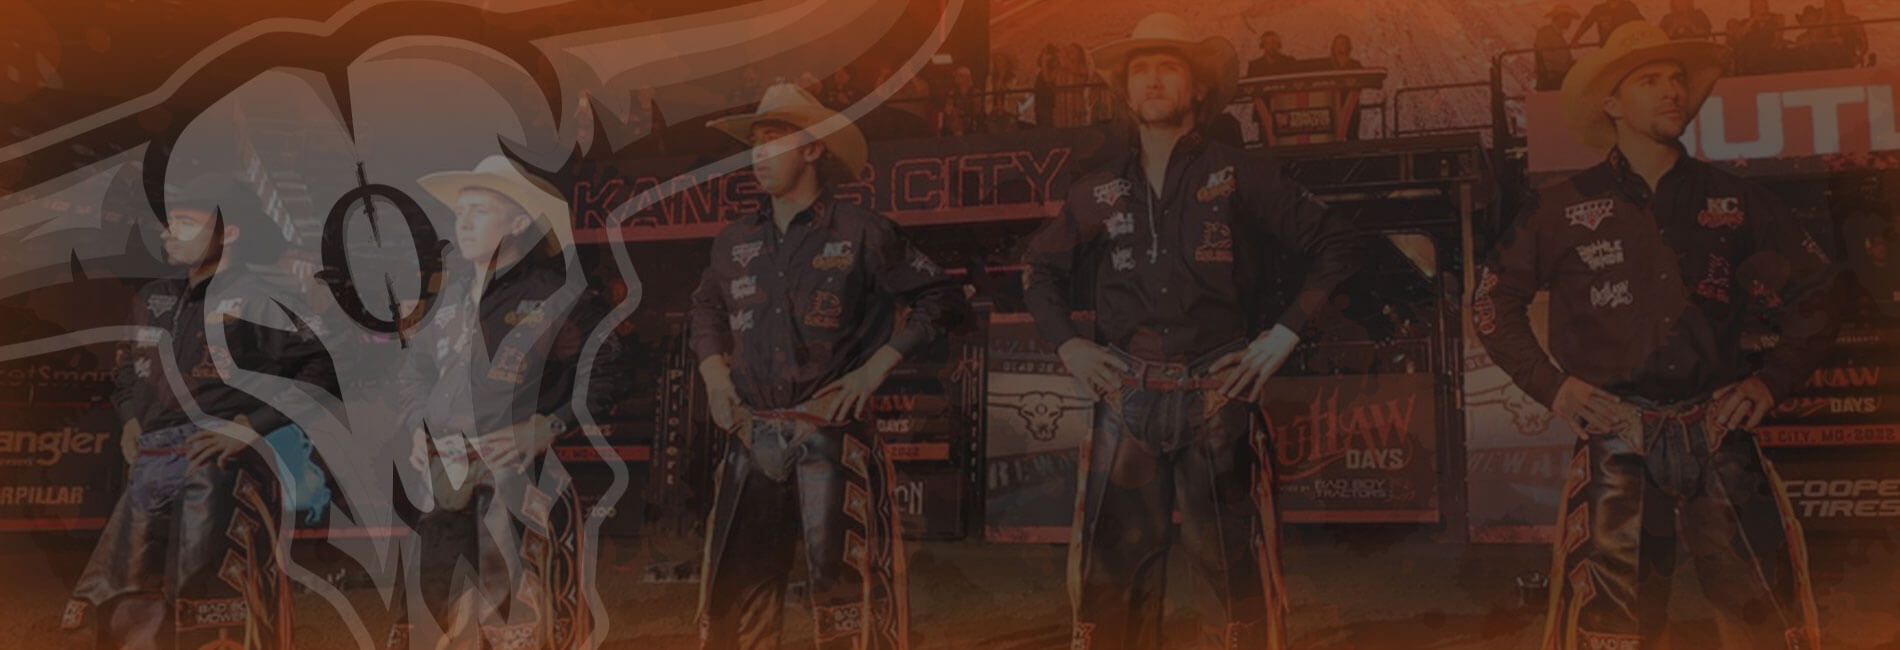 The Kansas City Outlaws standing at Outlaw Days.